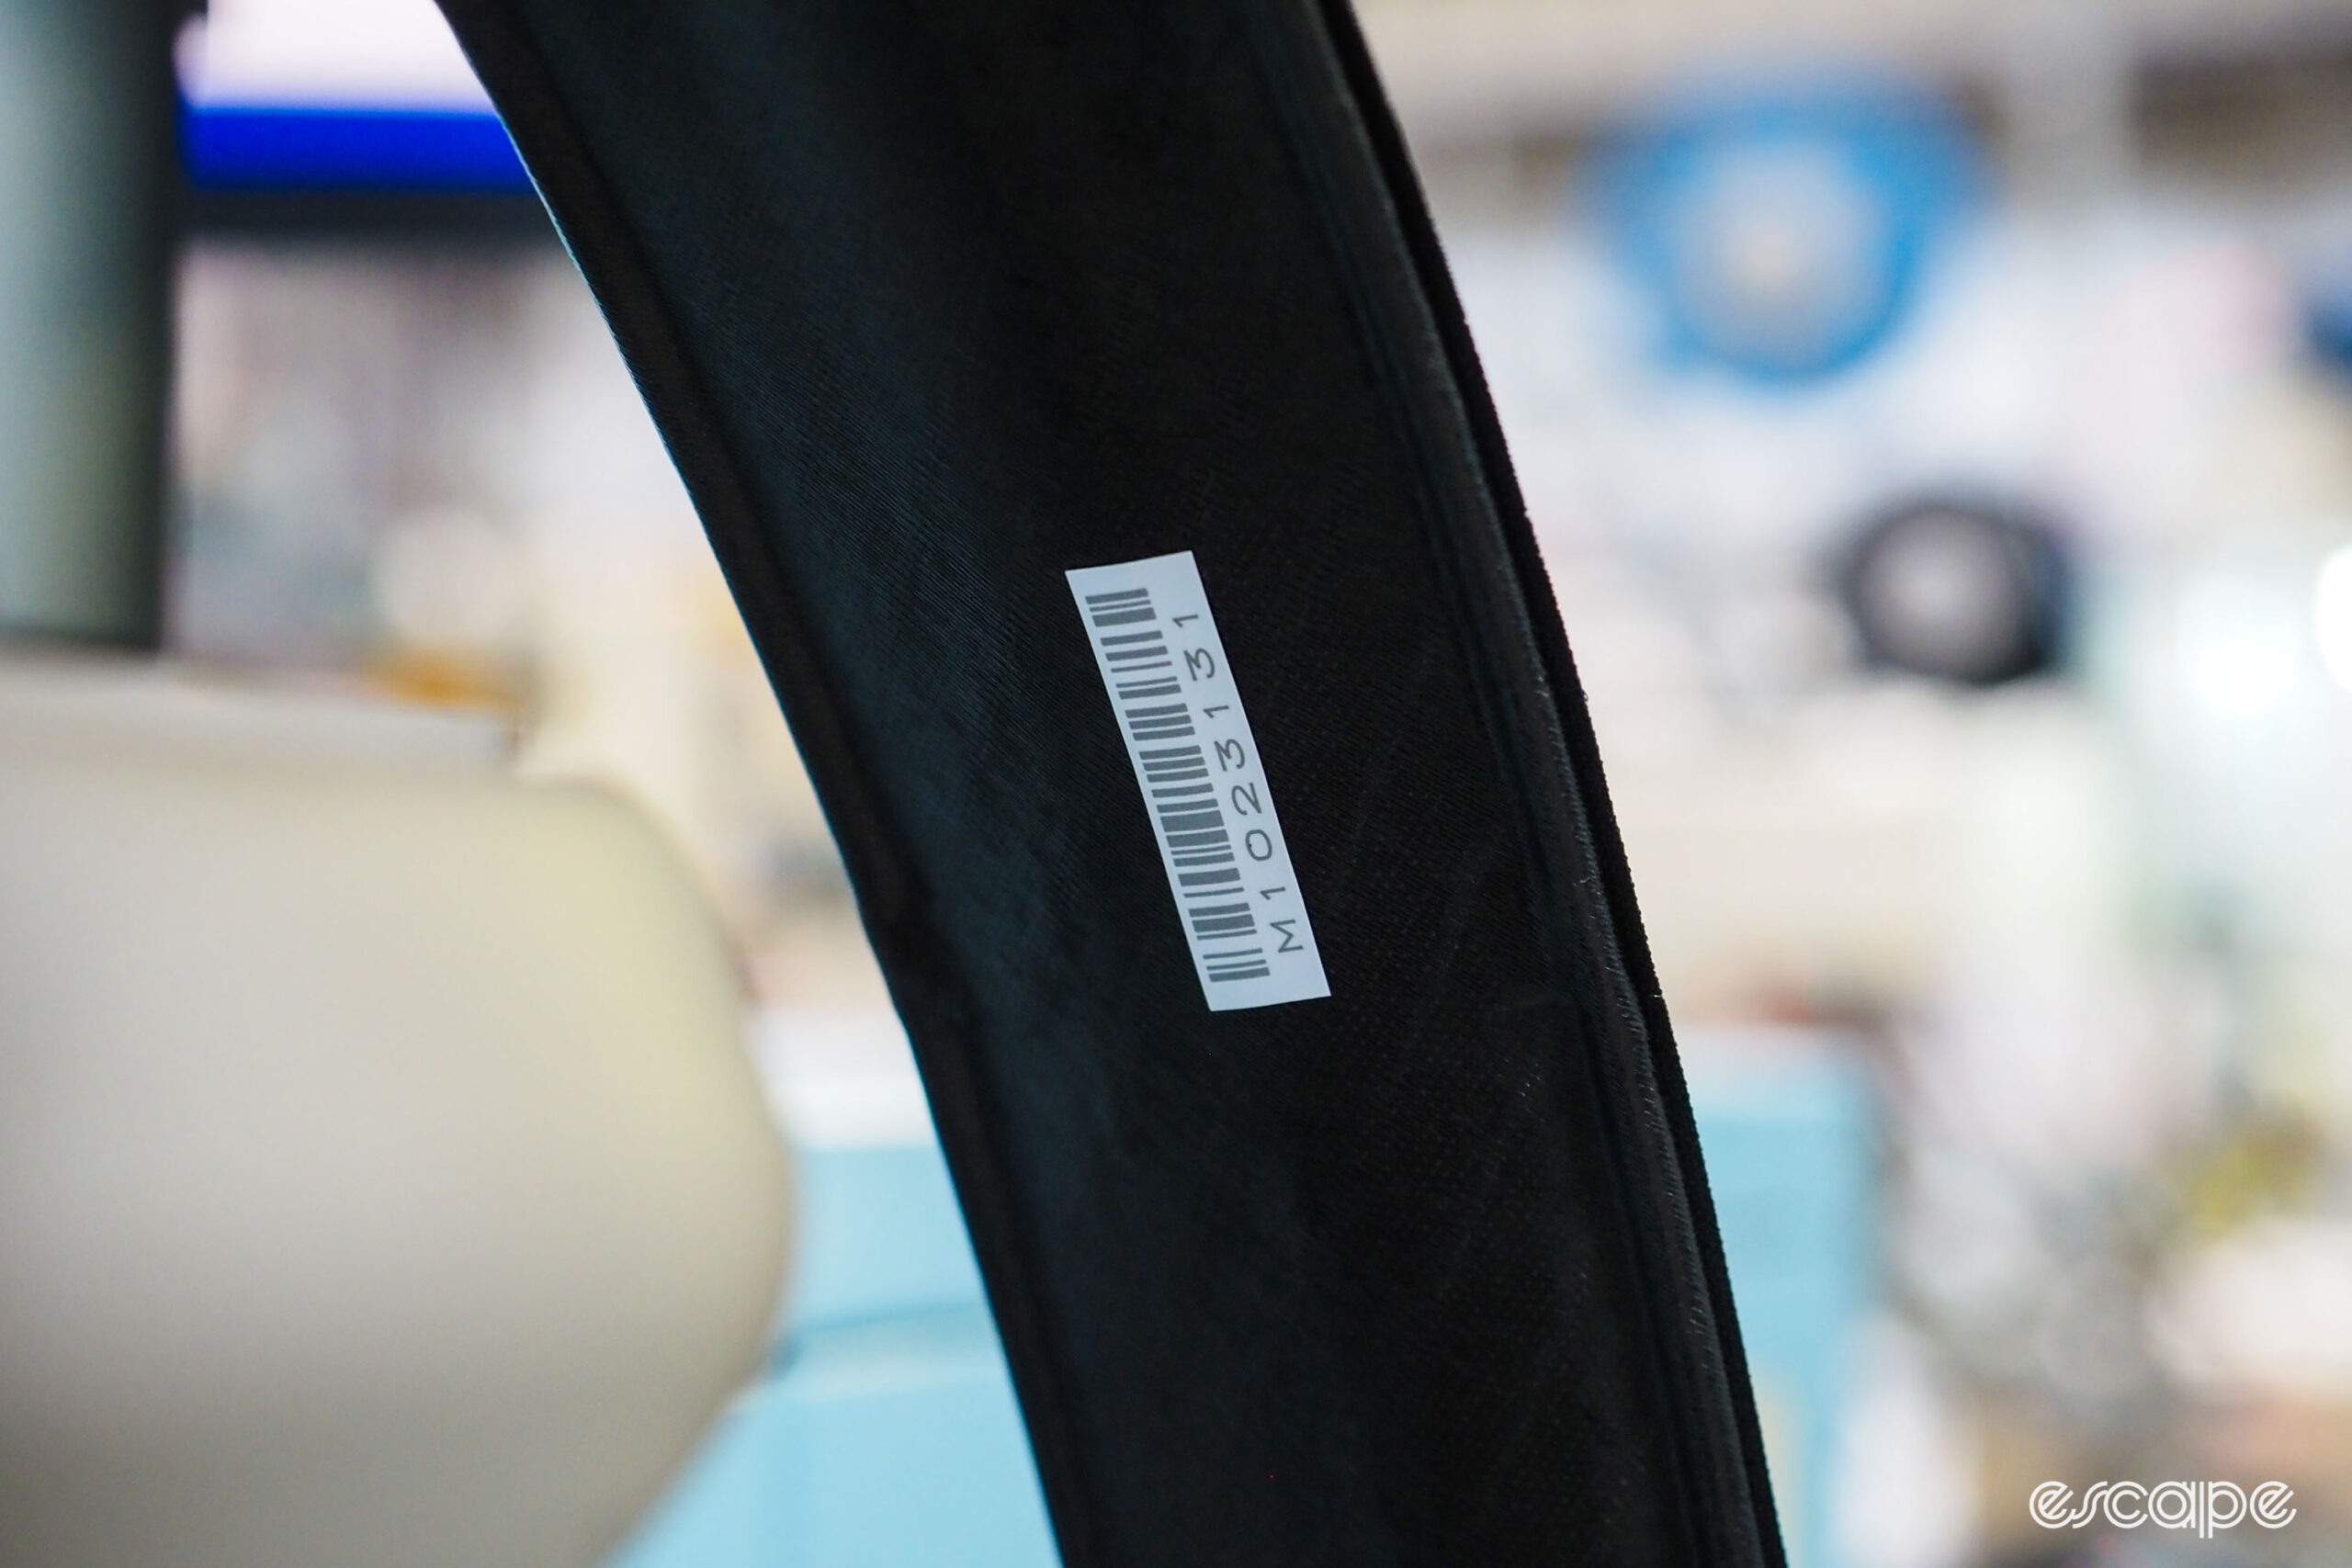 Goodyear Bicycle Tires factory tour tire bar codes